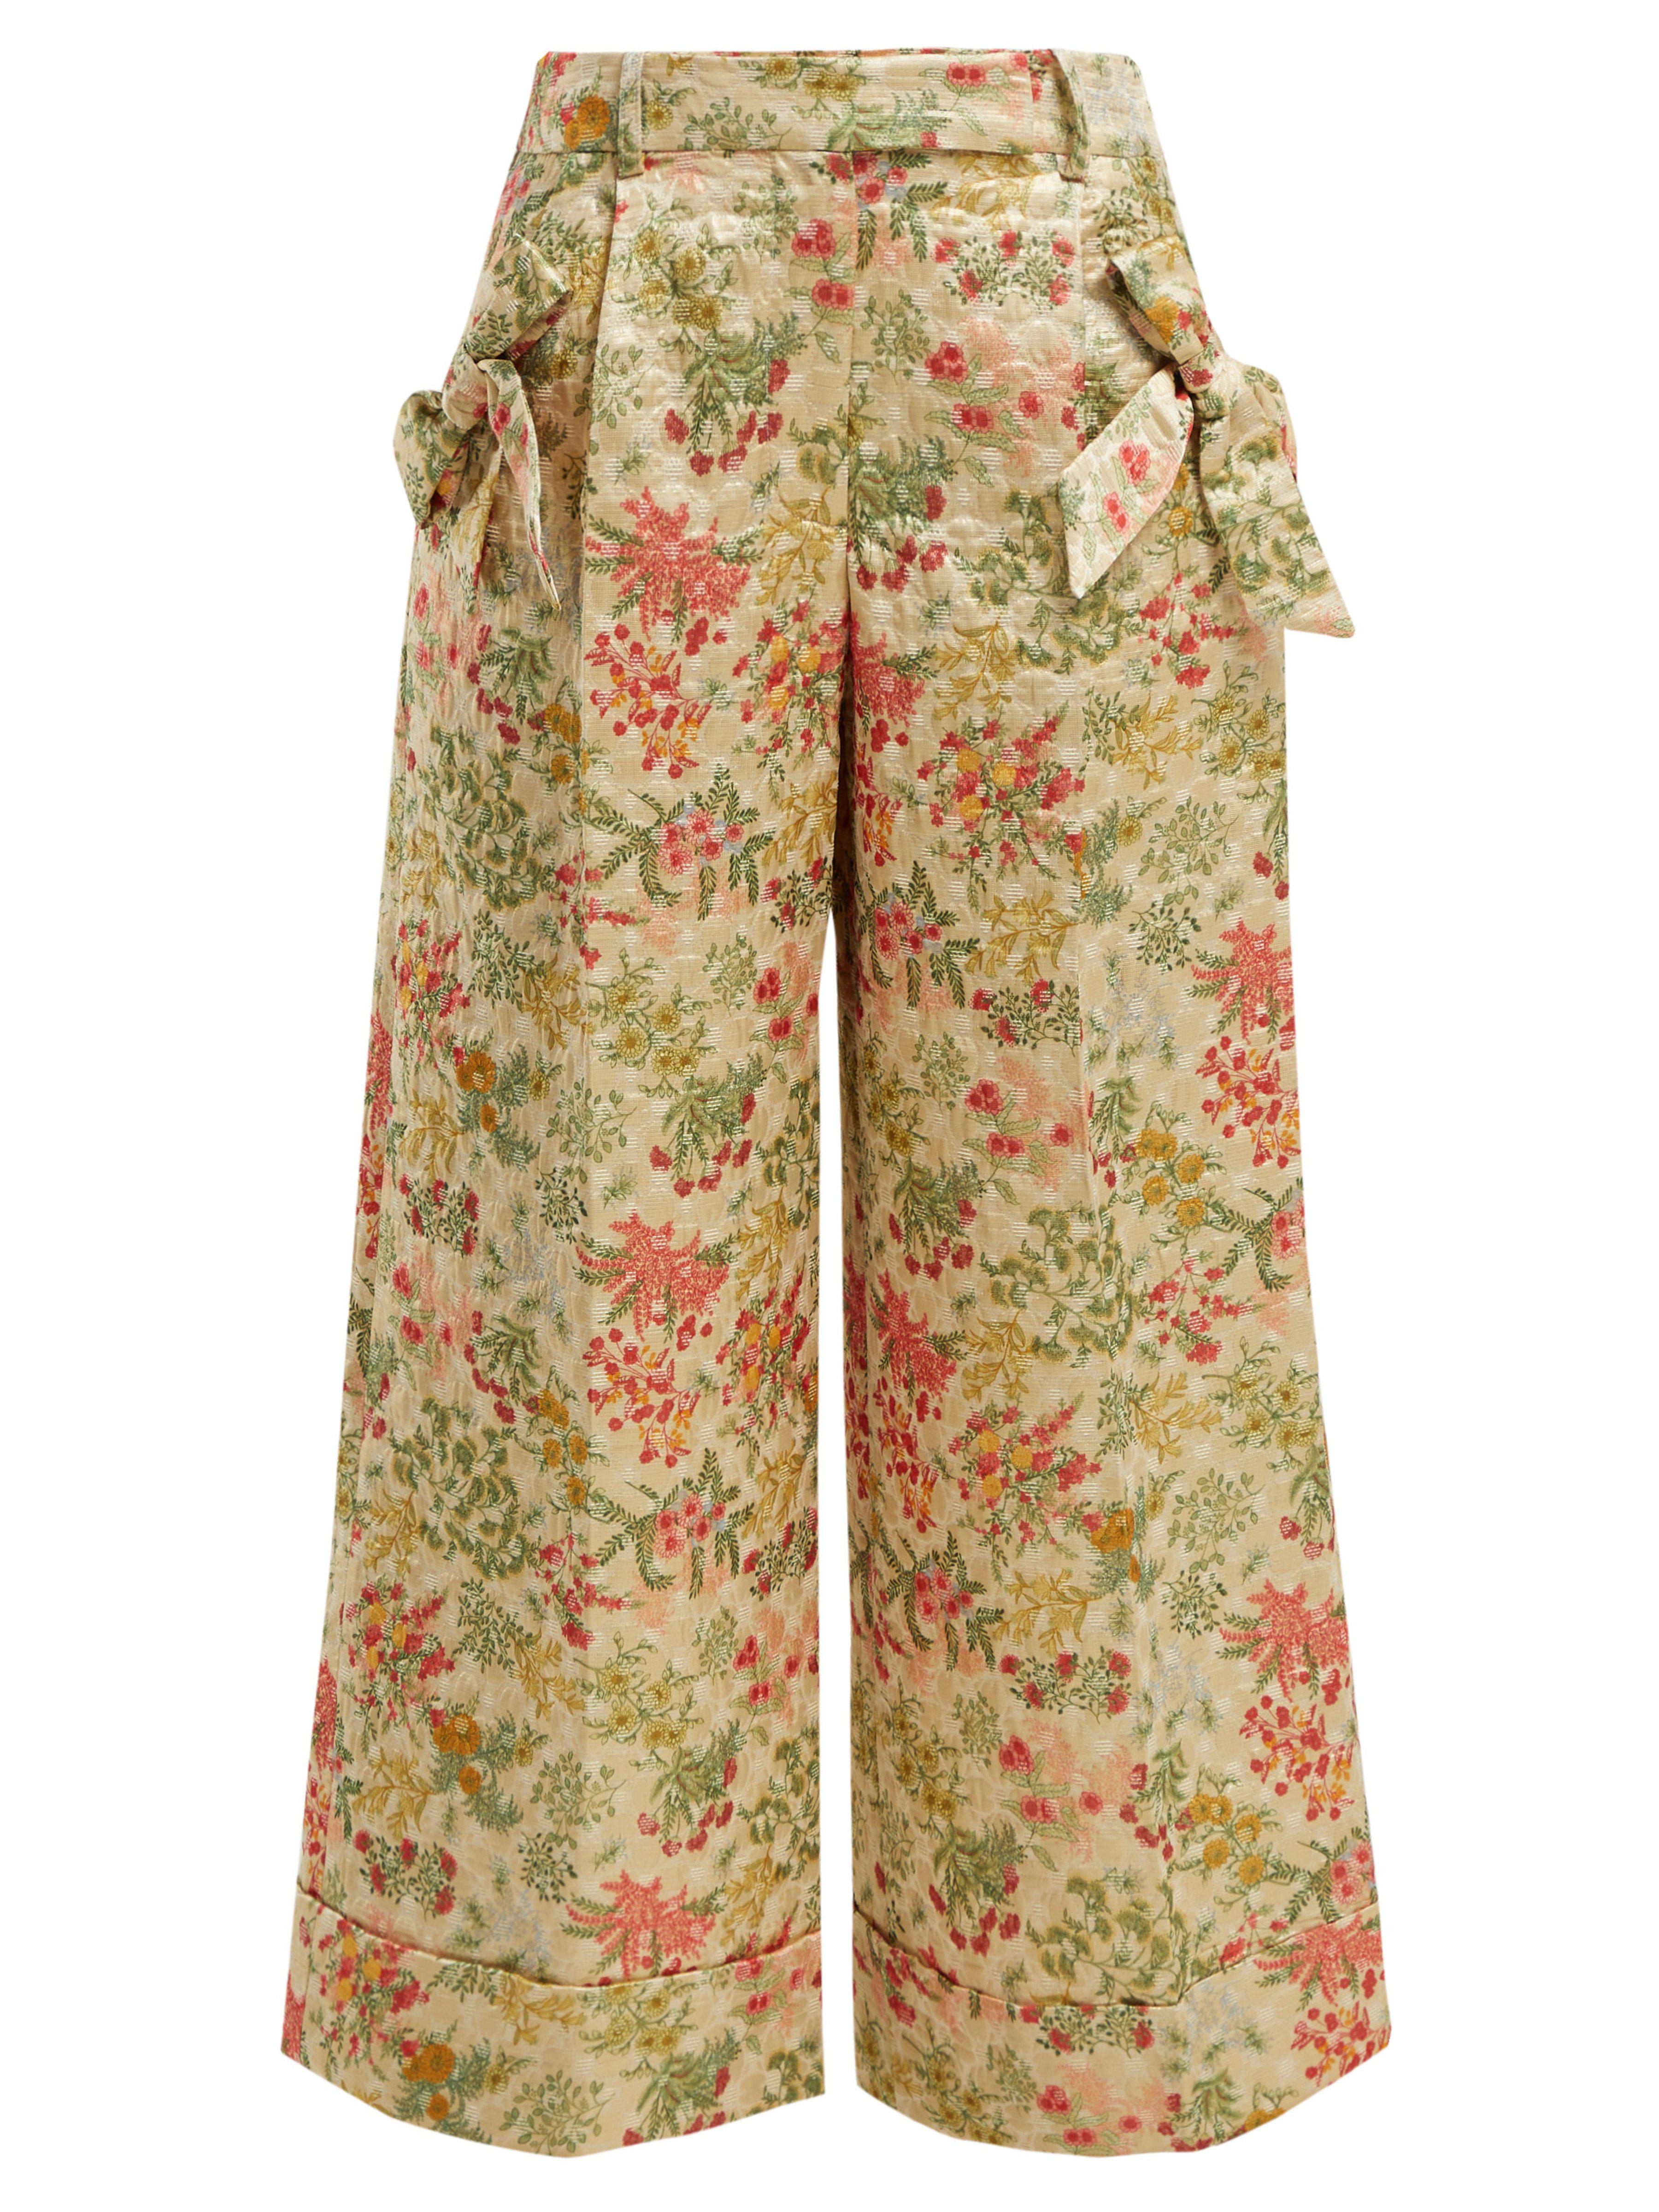 Simone Rocha Bow Trim Floral Brocade Trousers in Green - Lyst